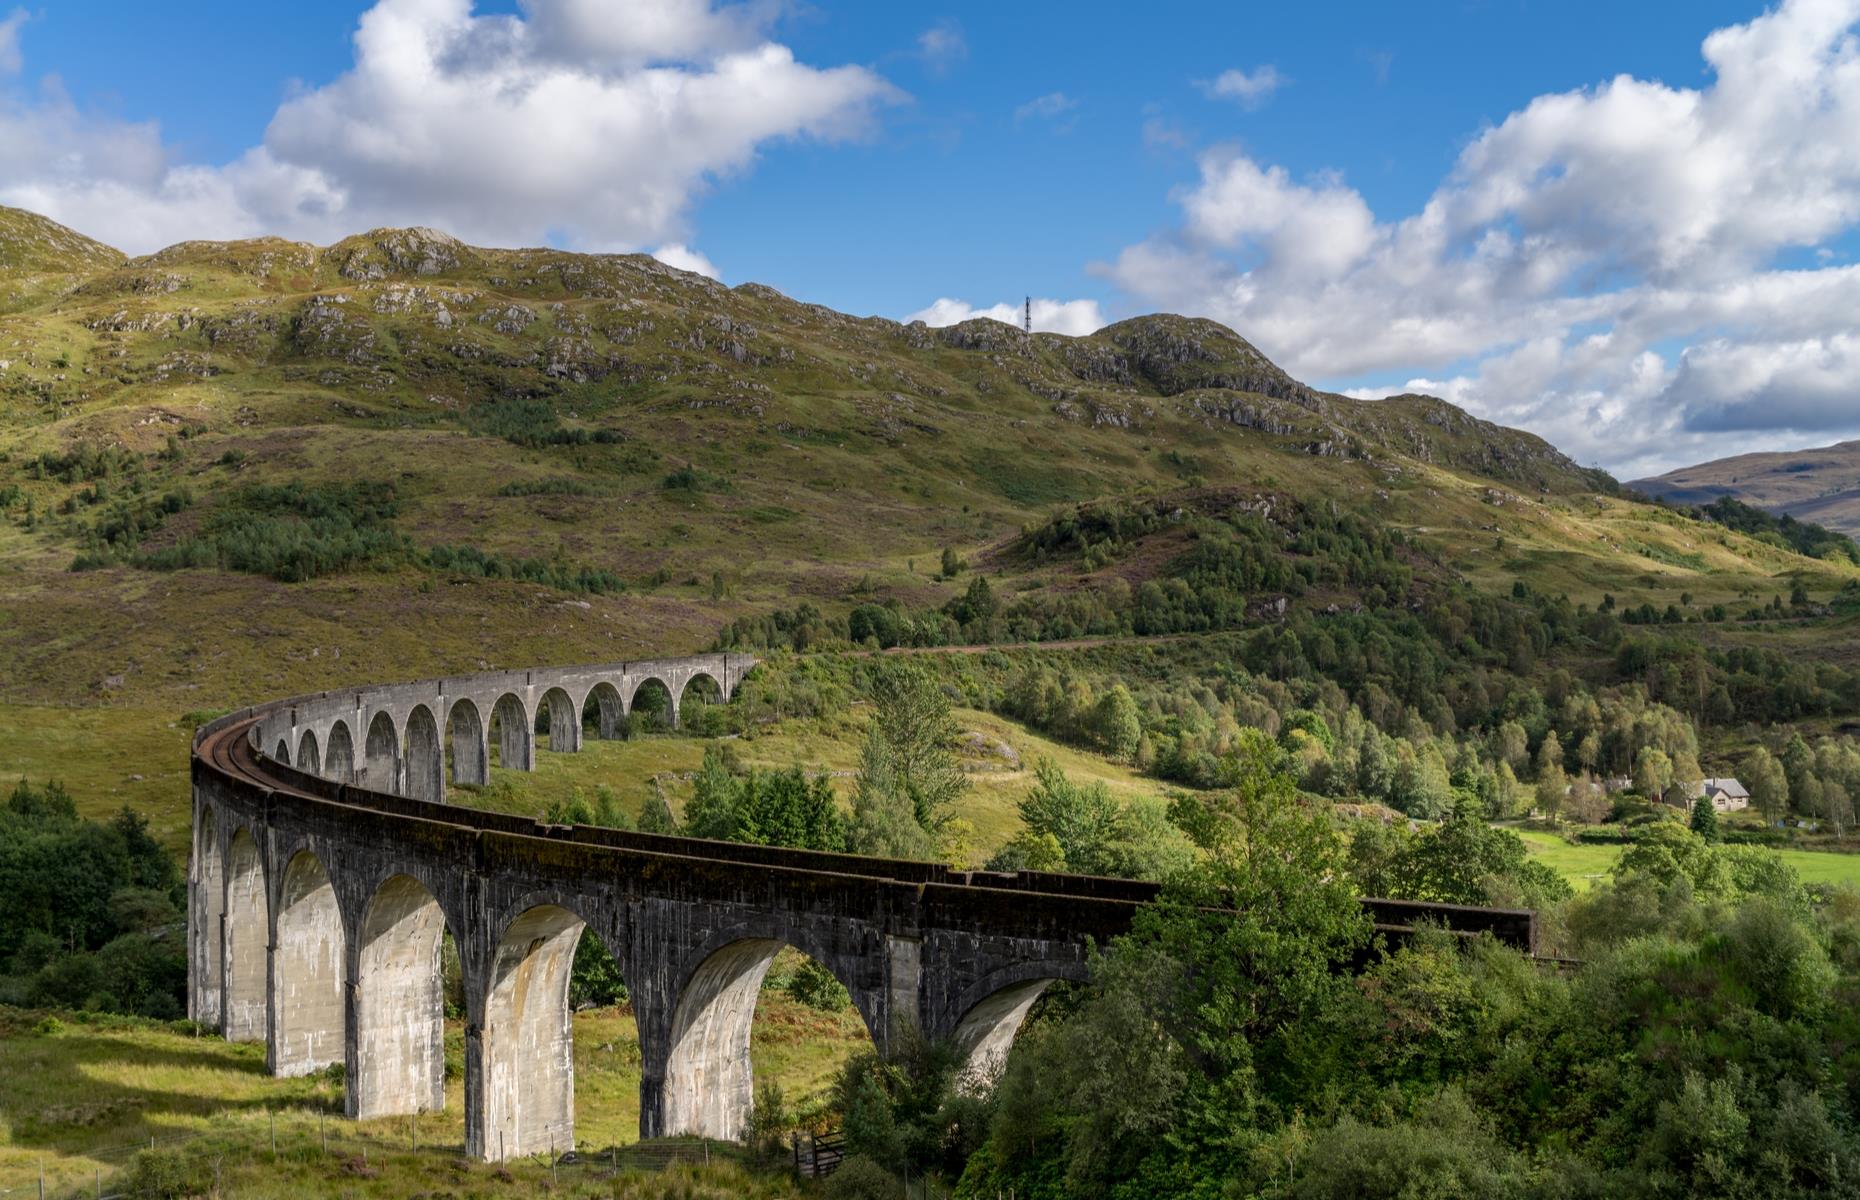 <p>The stunning 100-foot (30m), 21-arch viaduct in the Harry Potter films isn’t clever CGI trickery either. It would be hard to imagine a more beautiful natural setting for the sweeping Glenfinnan Viaduct than Loch Shiel and the surrounding green rolling hills of the Scottish Highlands.</p>